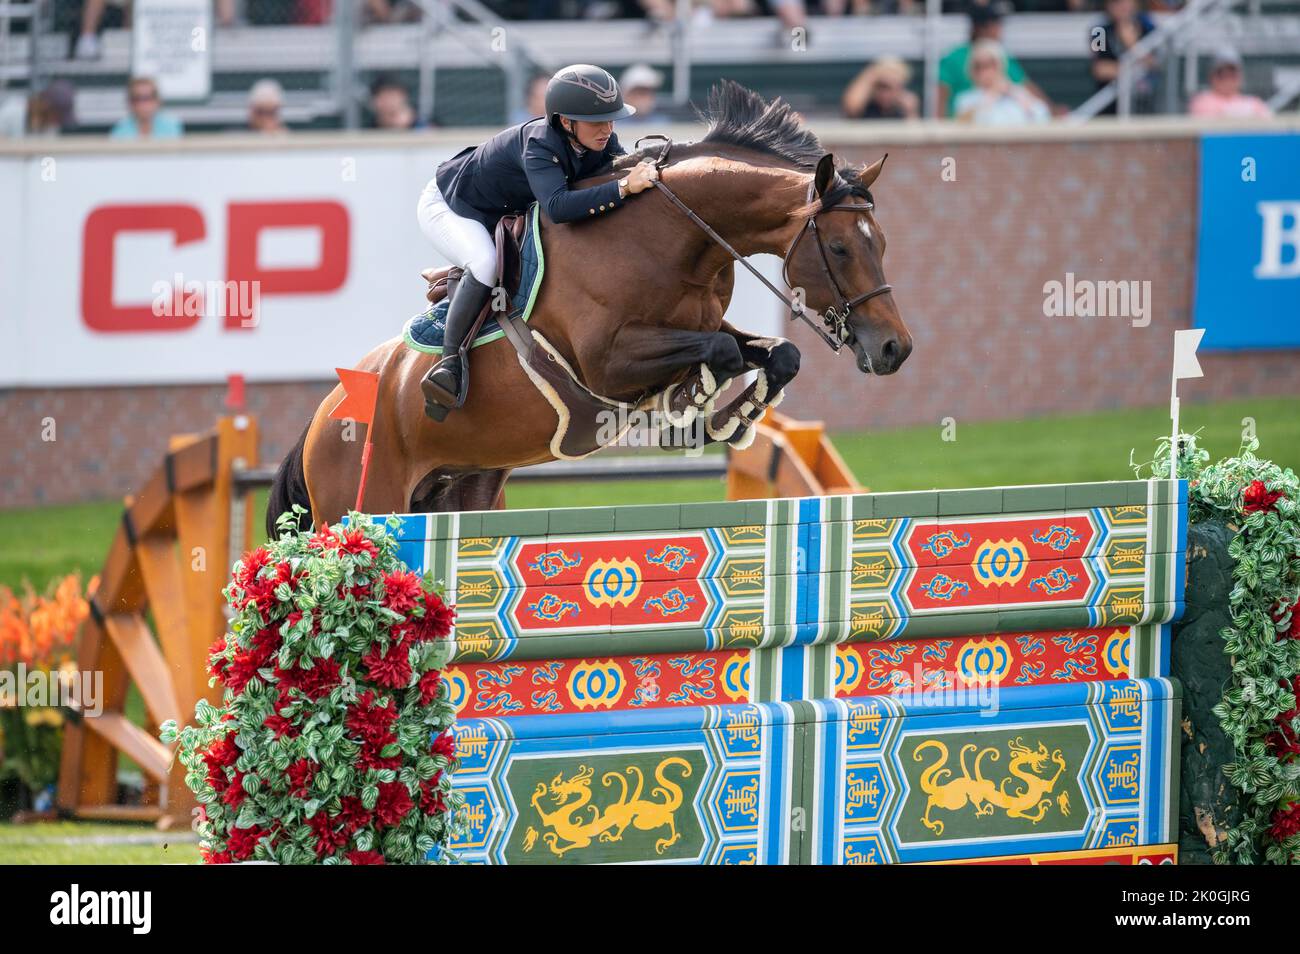 Calgary (Alberta), Canada, le 11 septembre 2022. Sanne Thijssen (NED) circonscription con Quidam RB, CSIO Spruce Meadows Masters, - CP Grand Prix: Credit Peter Llewellyn/Alay Live News Banque D'Images